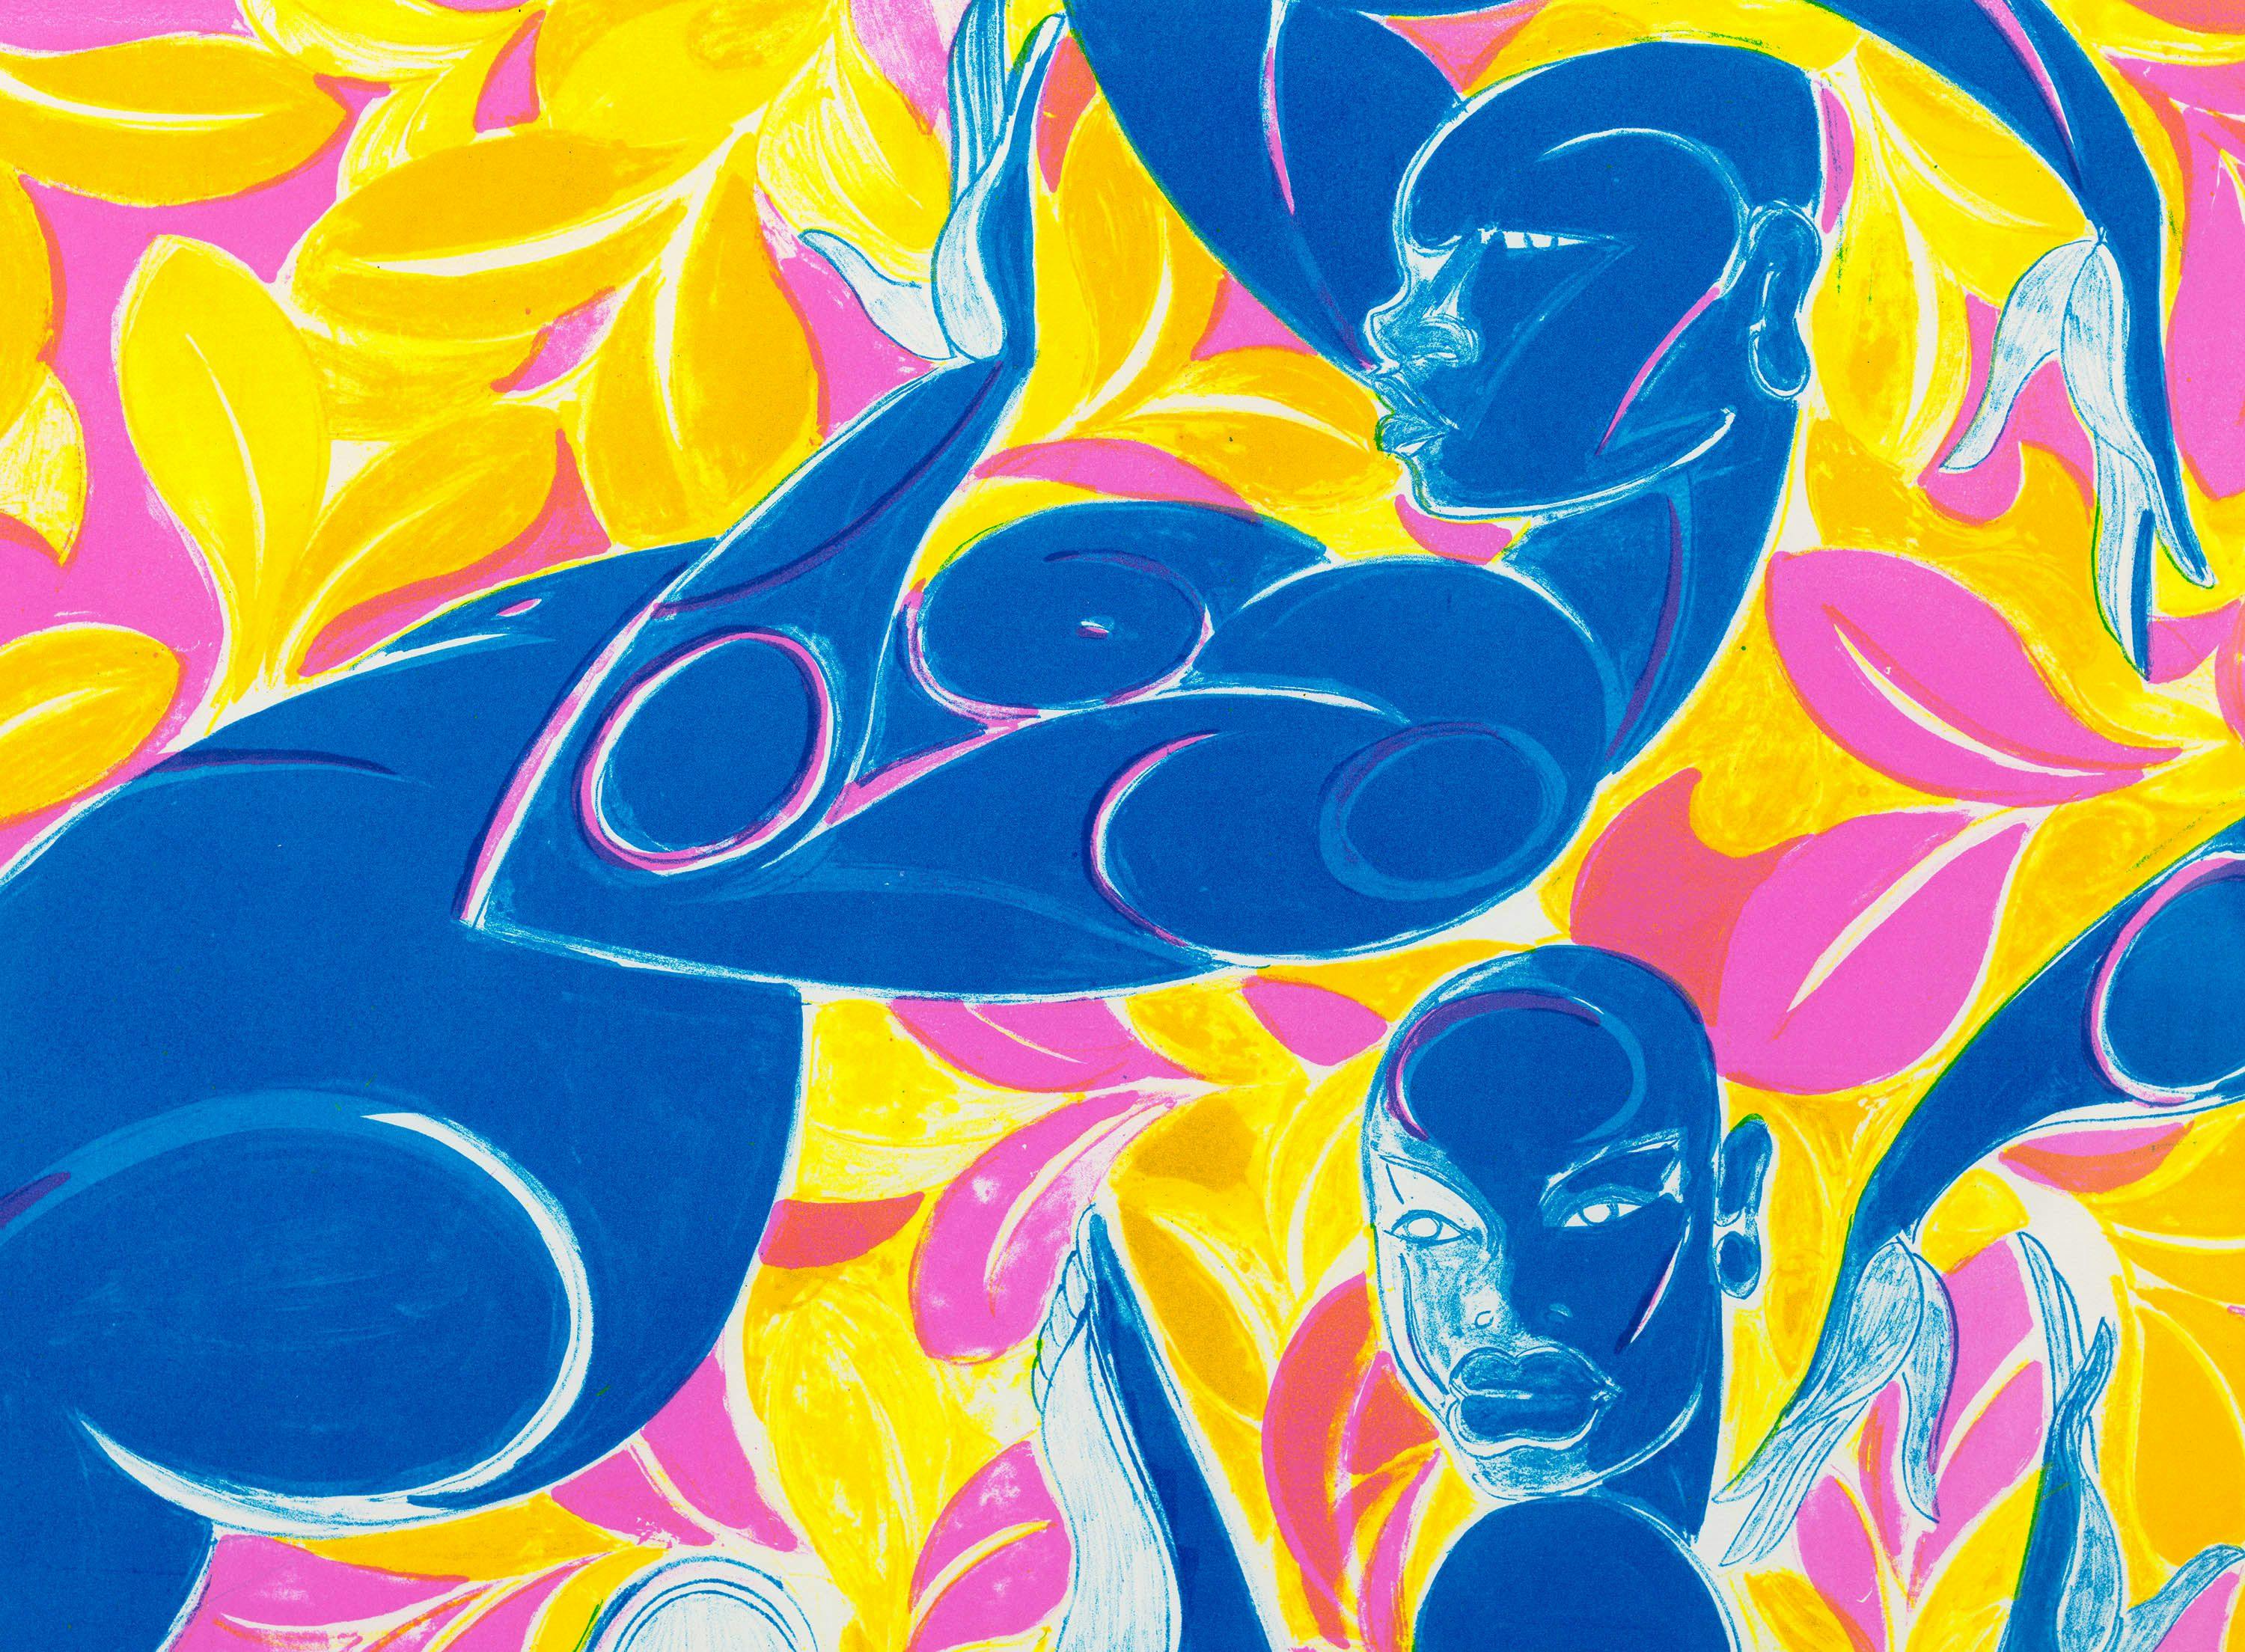 A detail from a print by Tunji Adeniyi-Jones, titled Sunrisers, dated 2022.